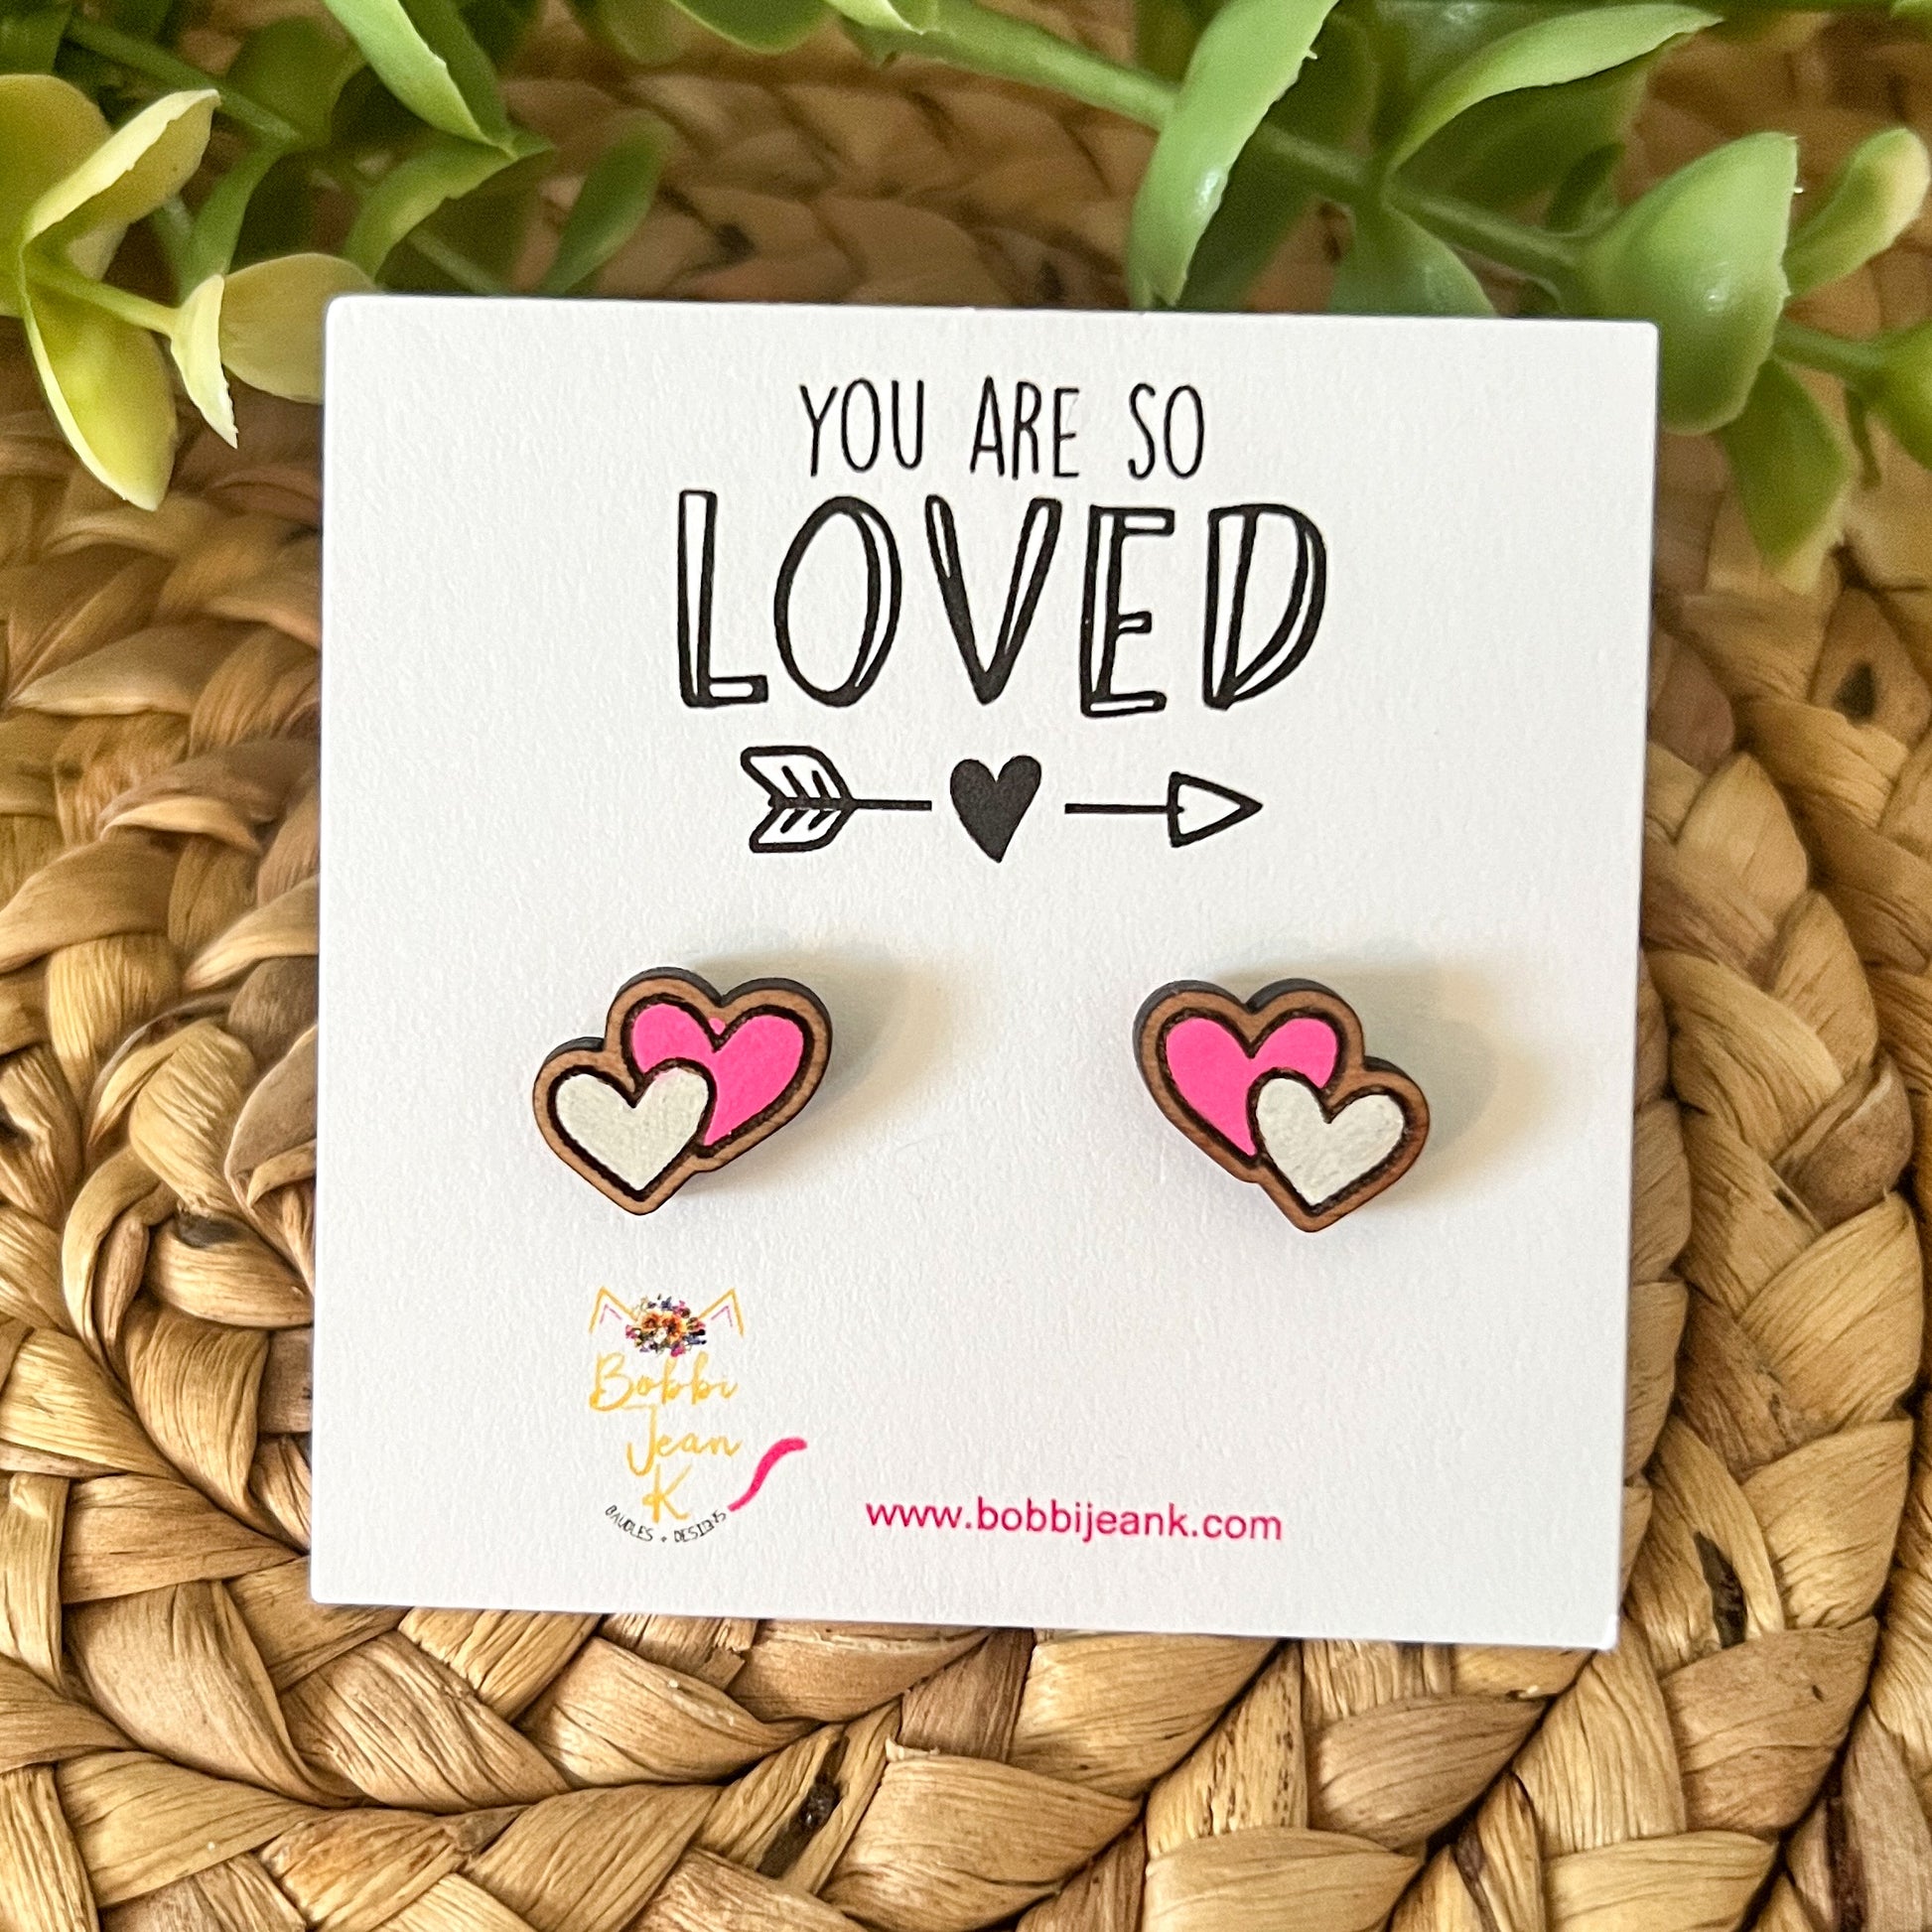 You Are So Loved Earring & Stud Card Add-On for Gift-Giving